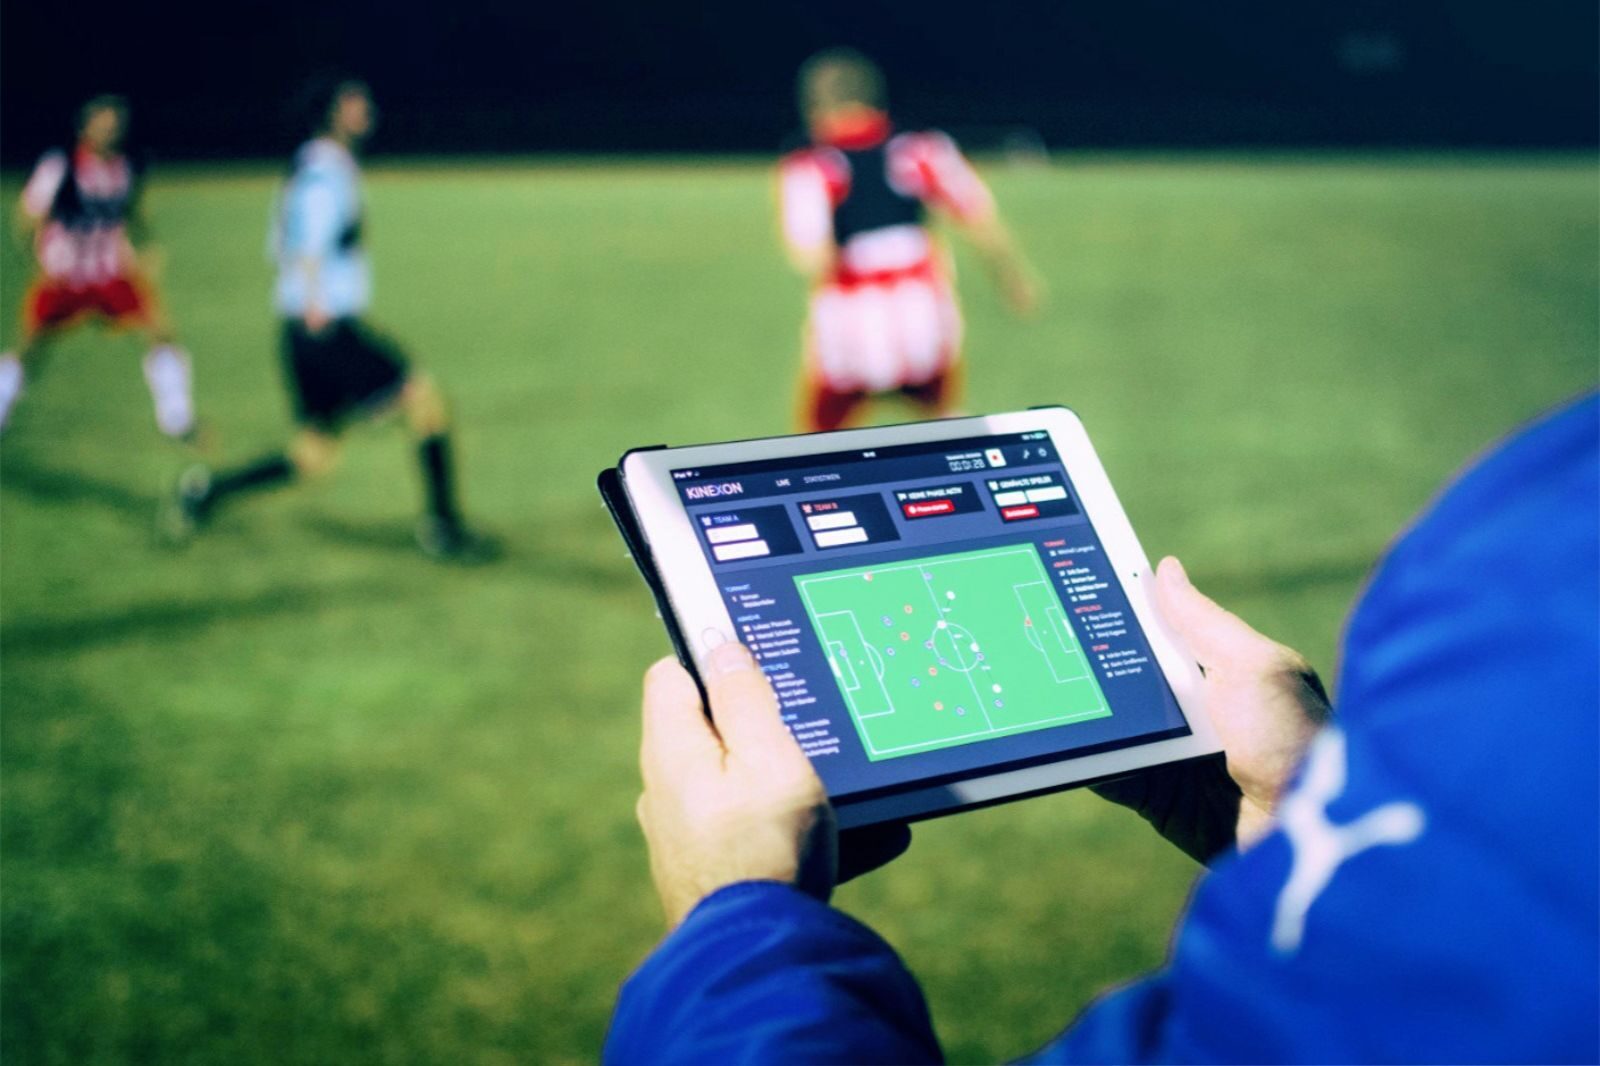 The use of data analytics in sports is now common, and coaches often monitor real-time information during a practice or game.